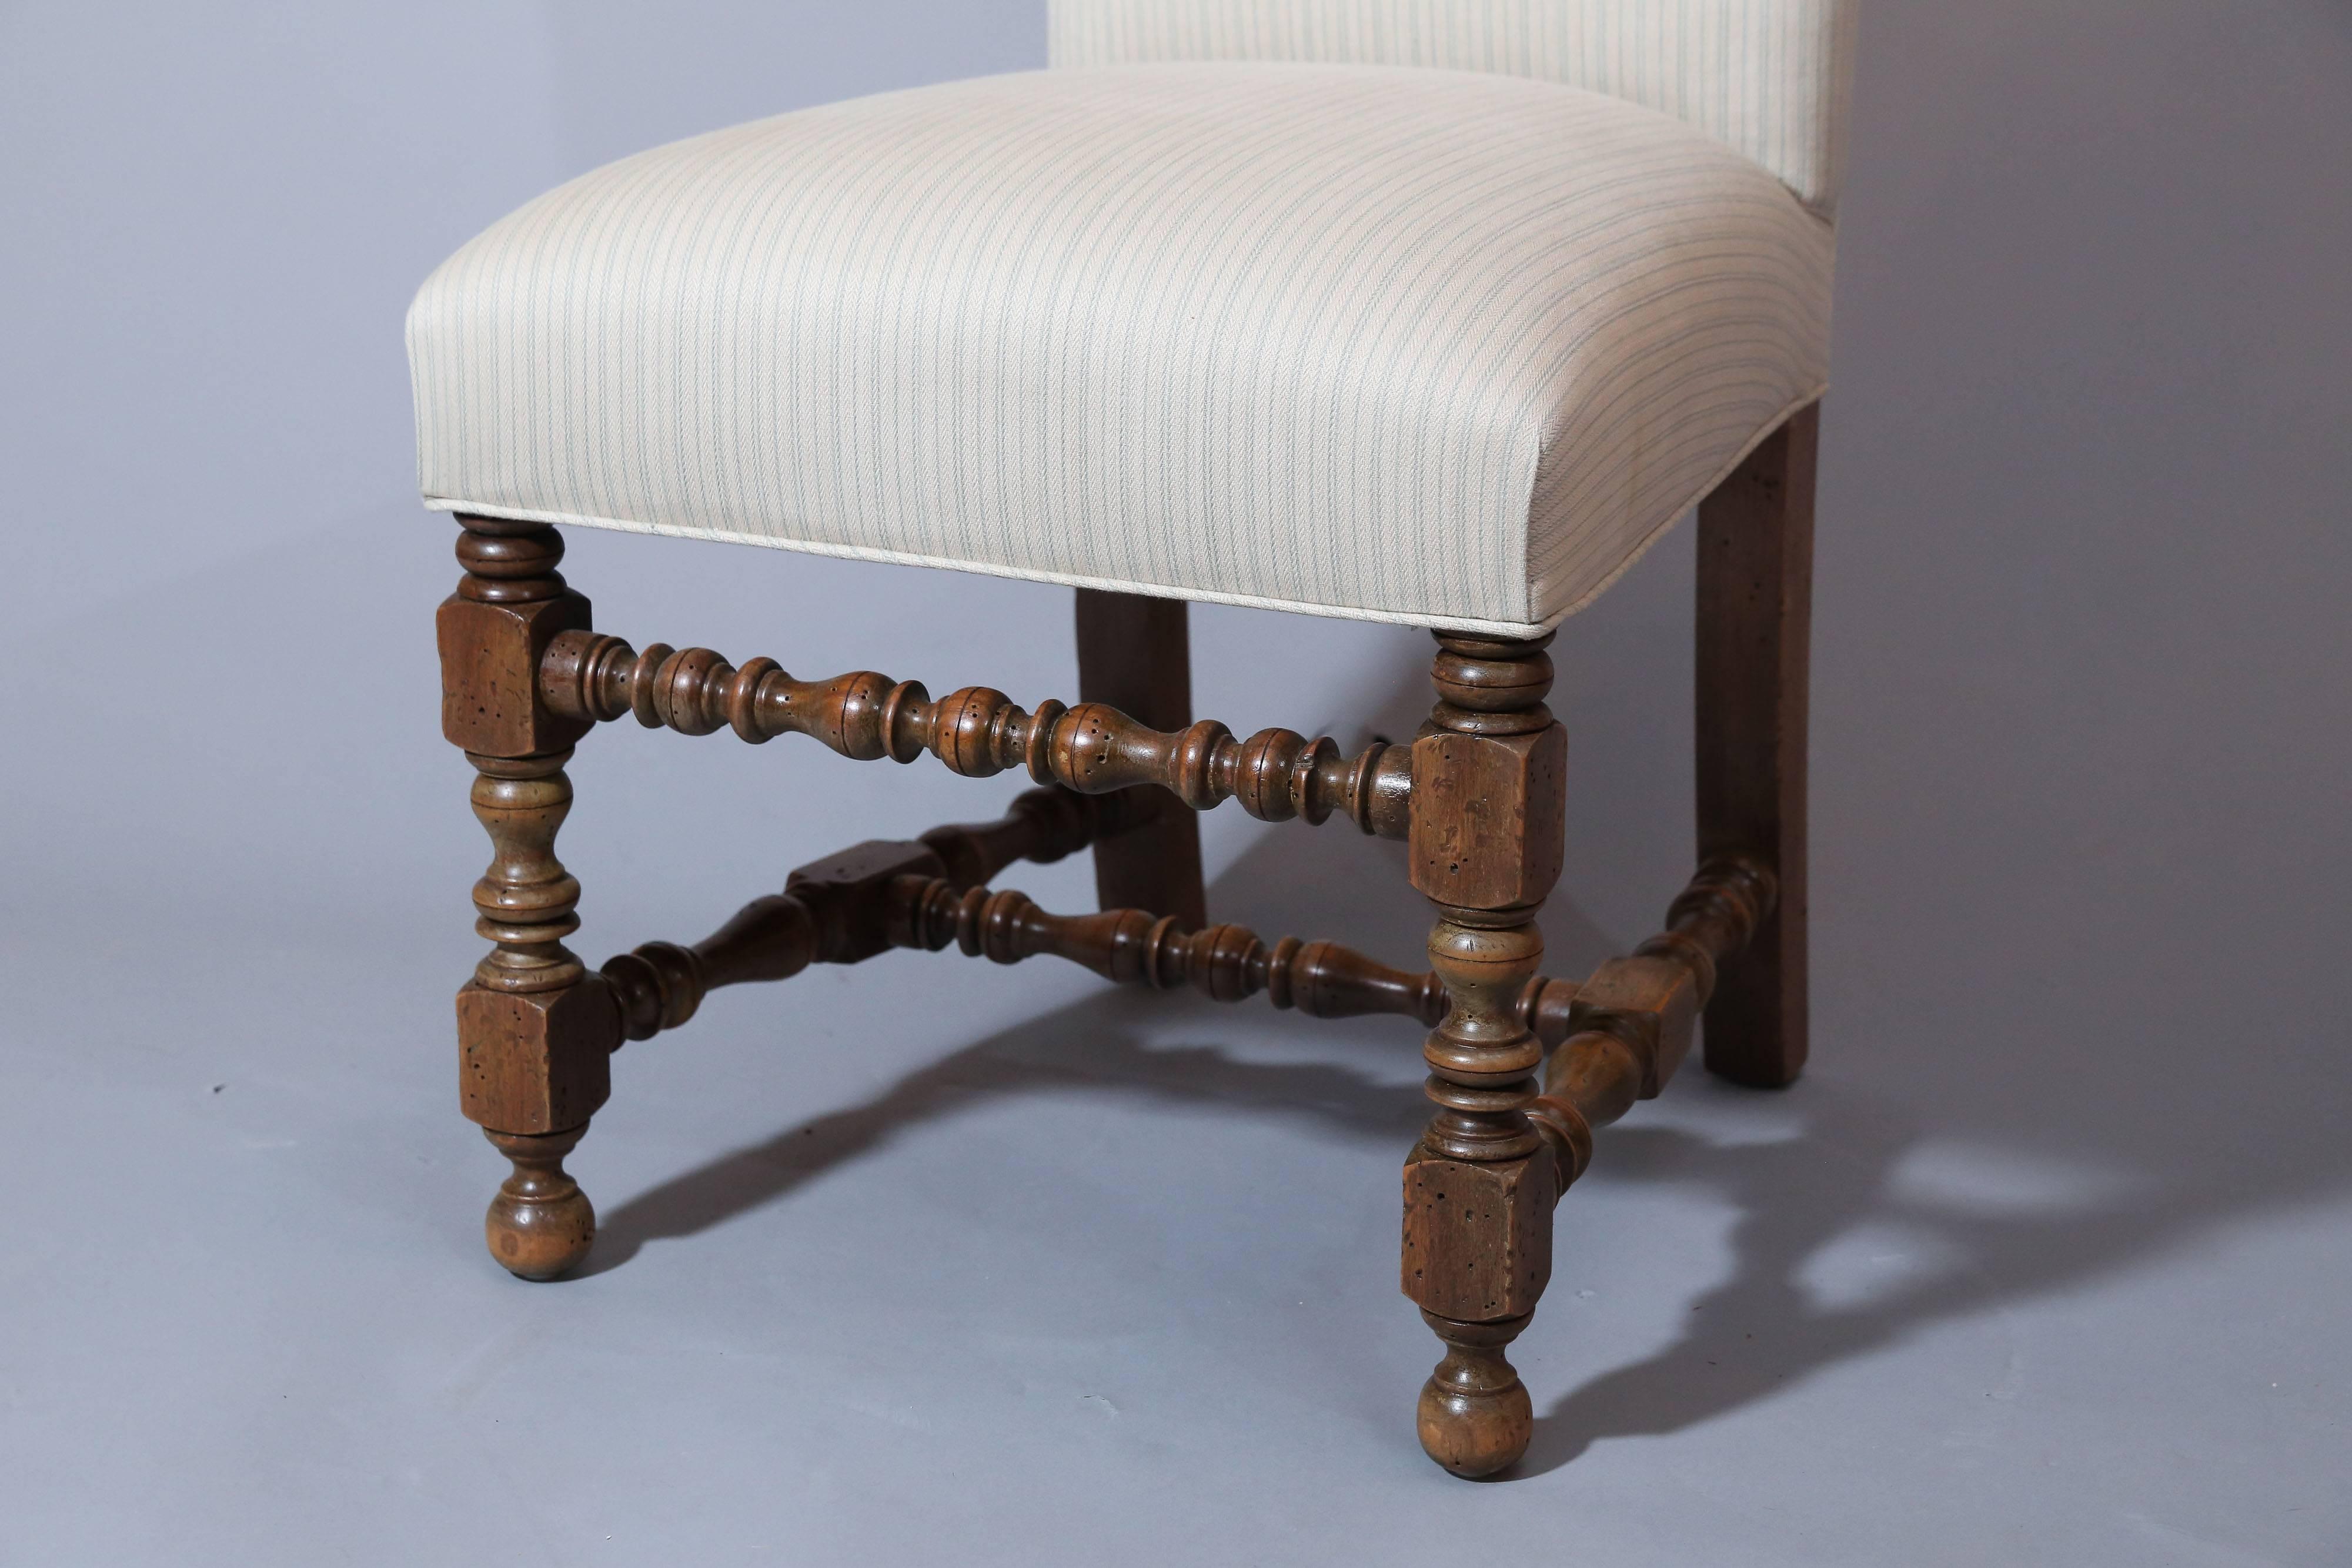 Set of six French Louis XIV-Style upholstered dining chairs have 
balustrade turnings on front legs and stretchers.
High back has a crest rail.